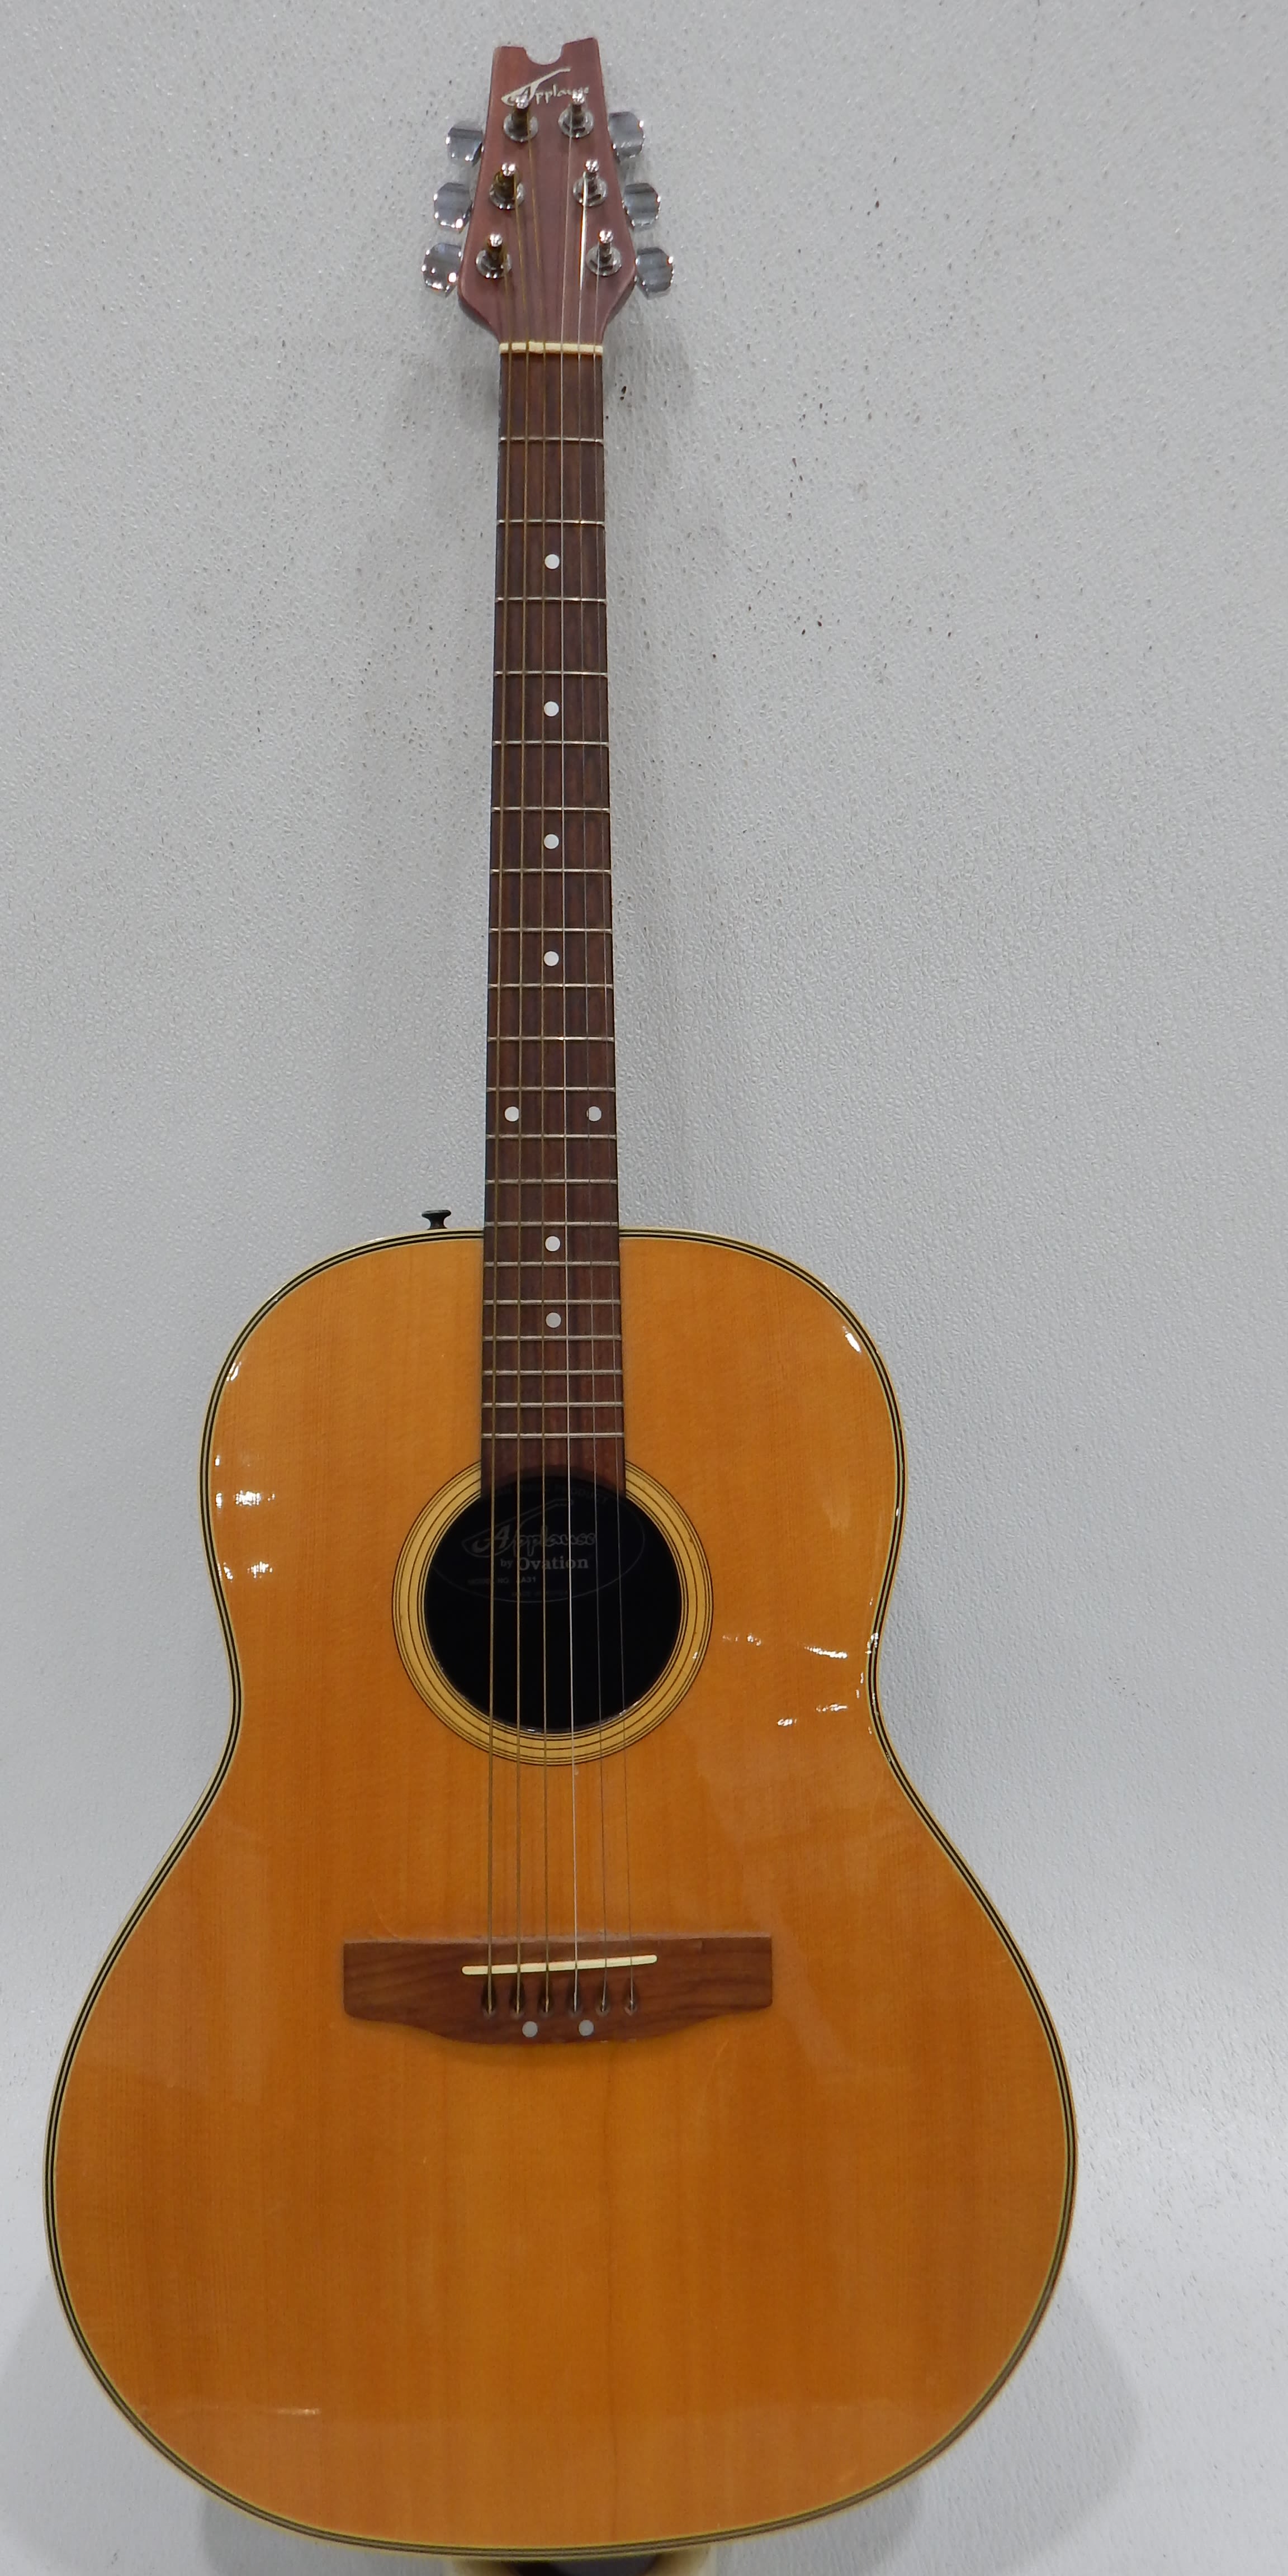 Buy the Applause by Ovation Brand AA31 Model Acoustic Guitar 